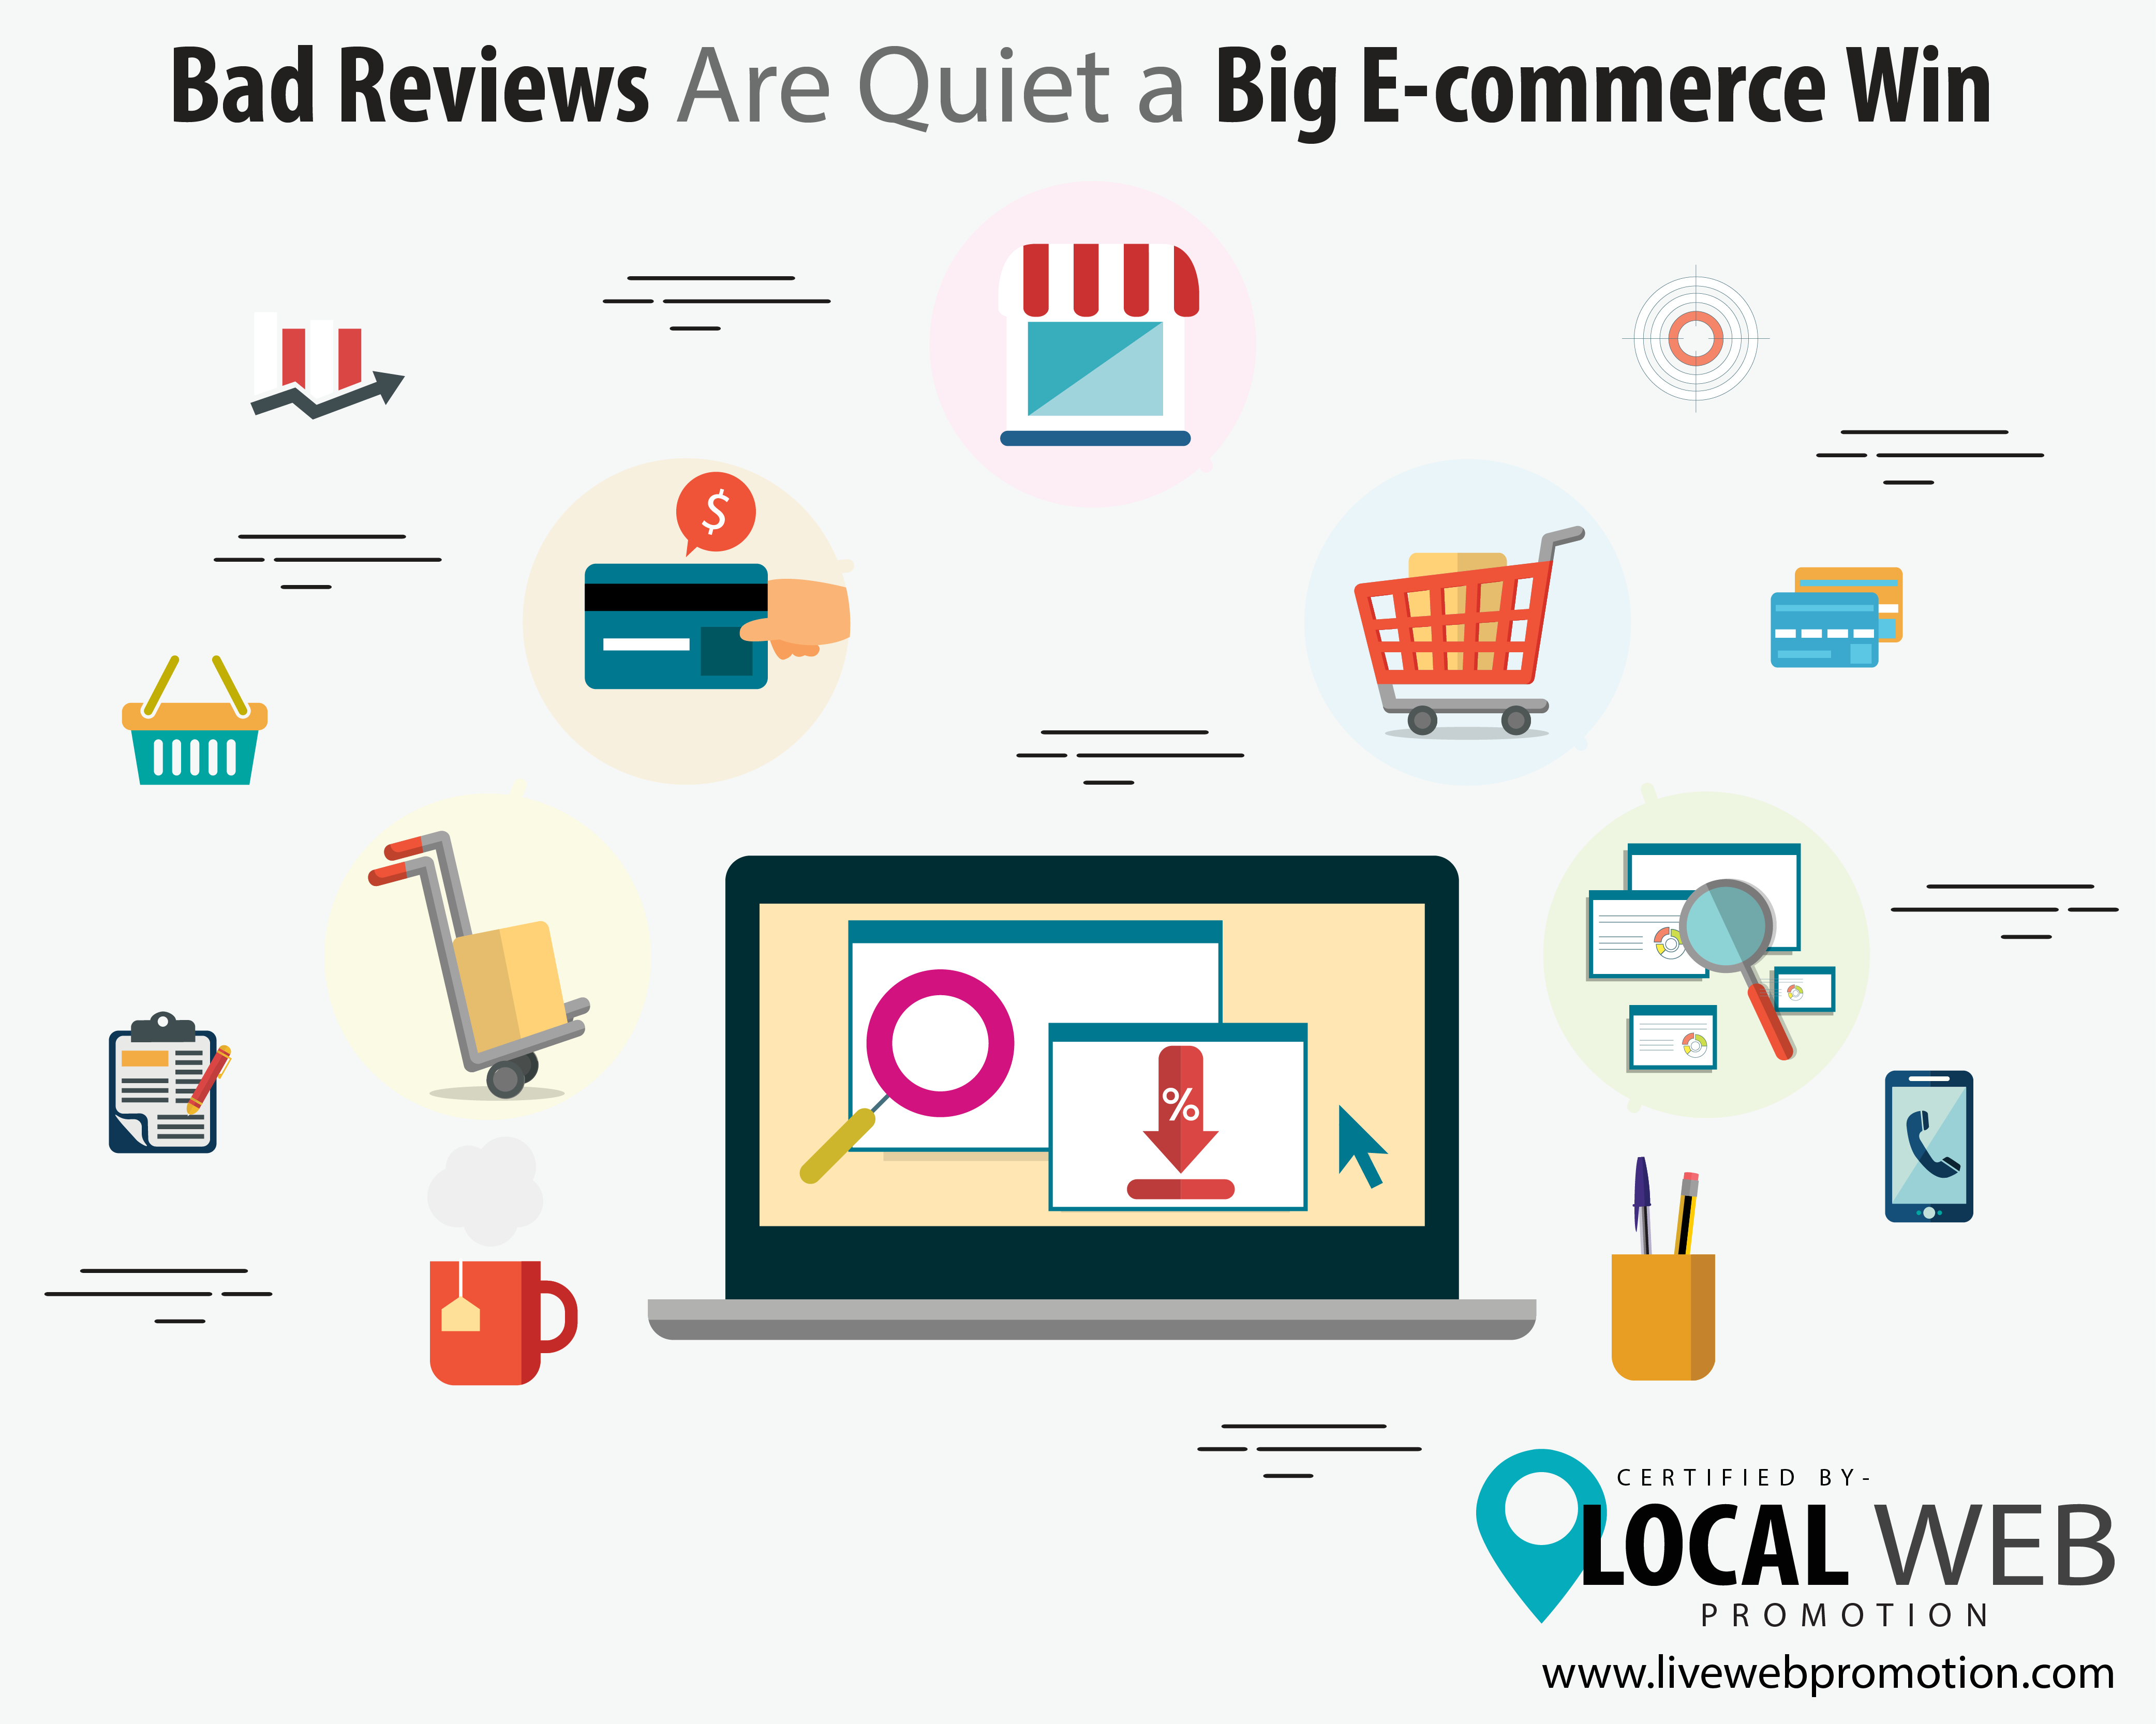 Why Bad Reviews Are Quiet a Big E-commerce Win